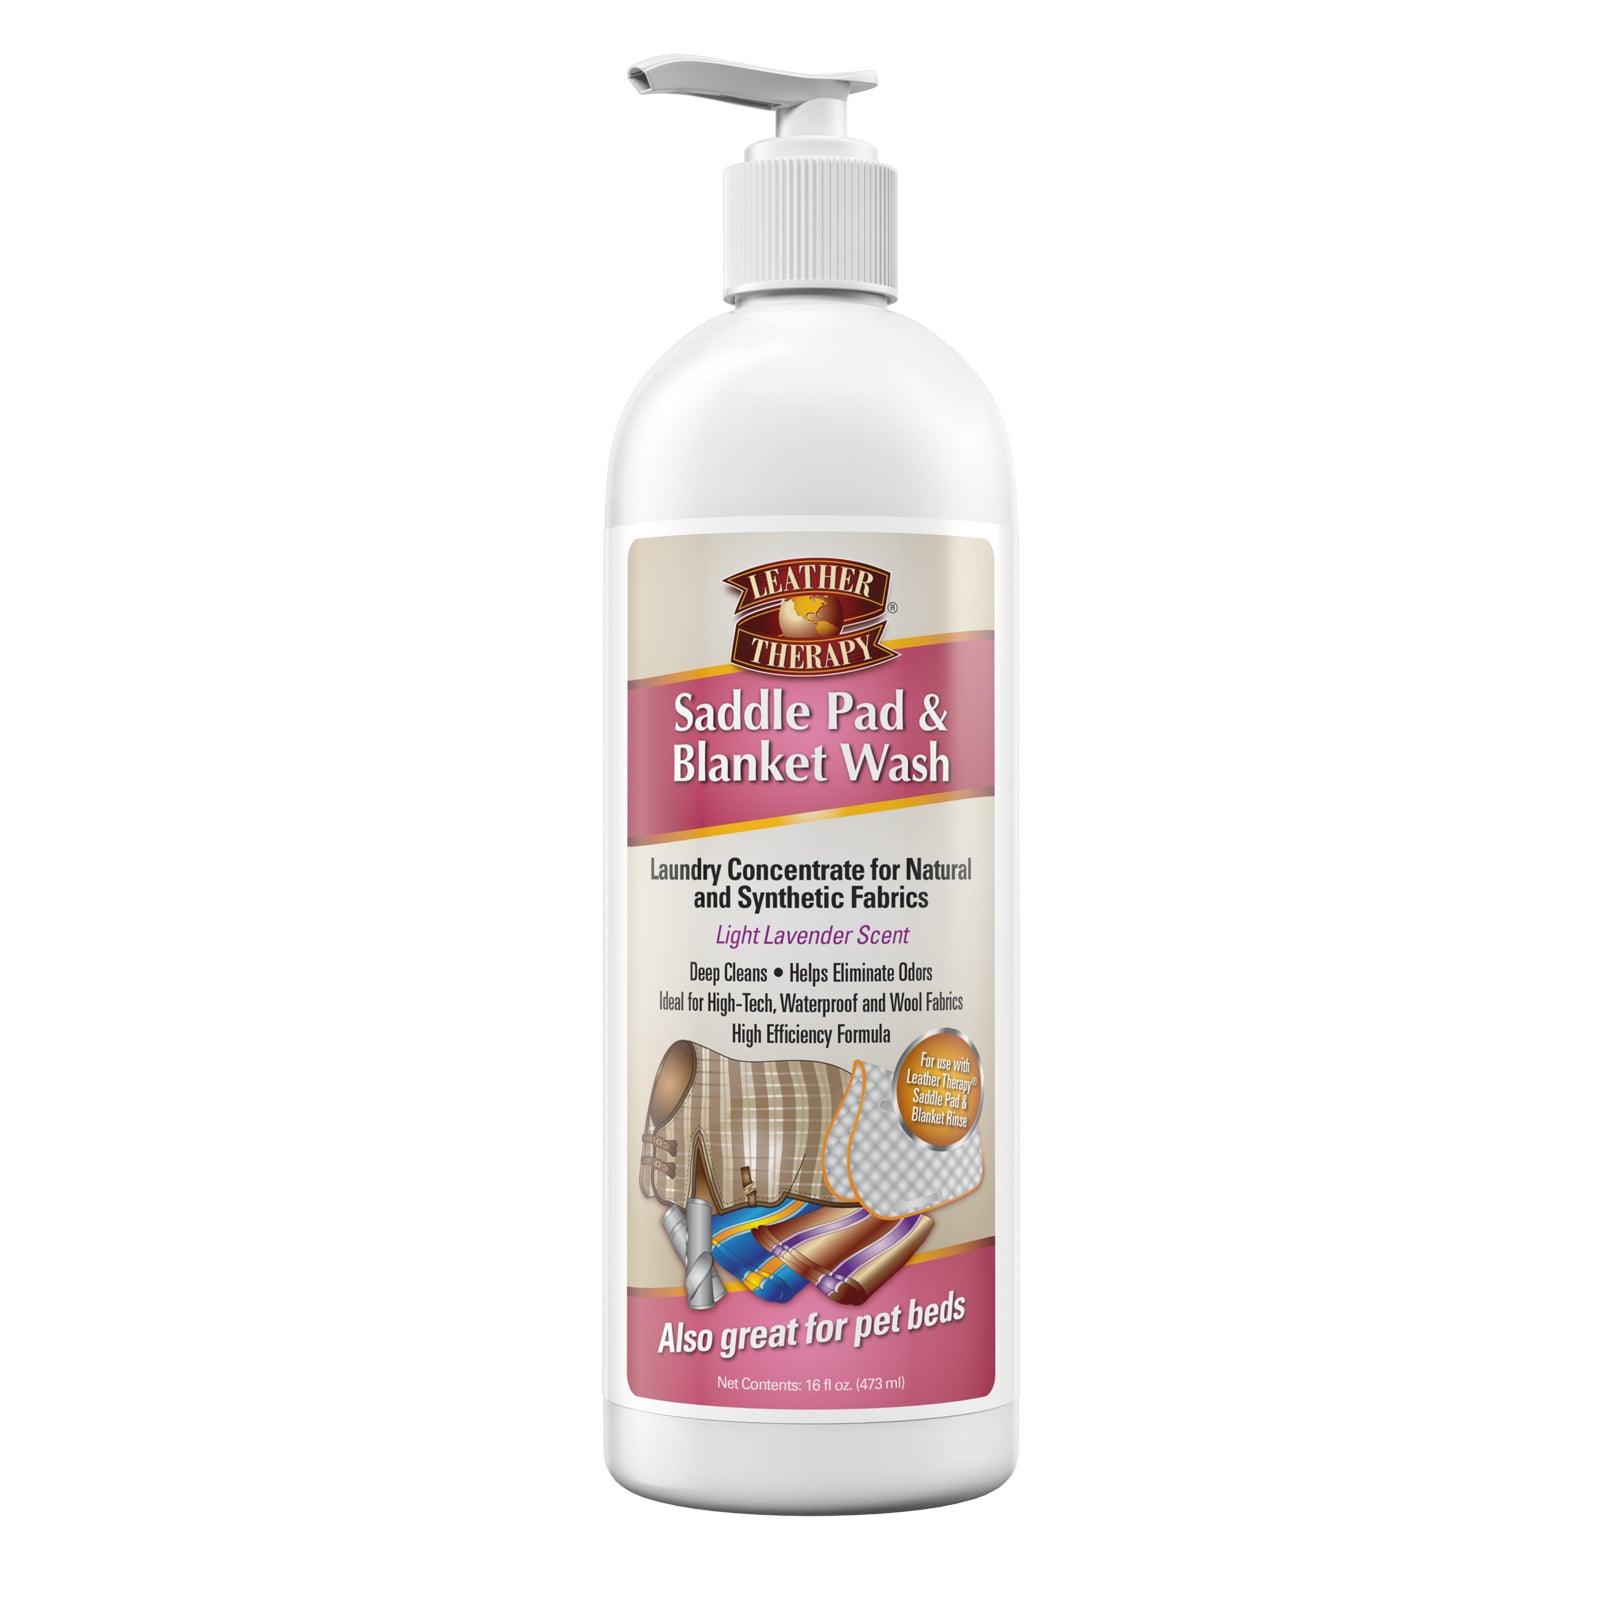 Leather Therapy® Saddle Pad & Blanket Wash Leather Care absorbine   